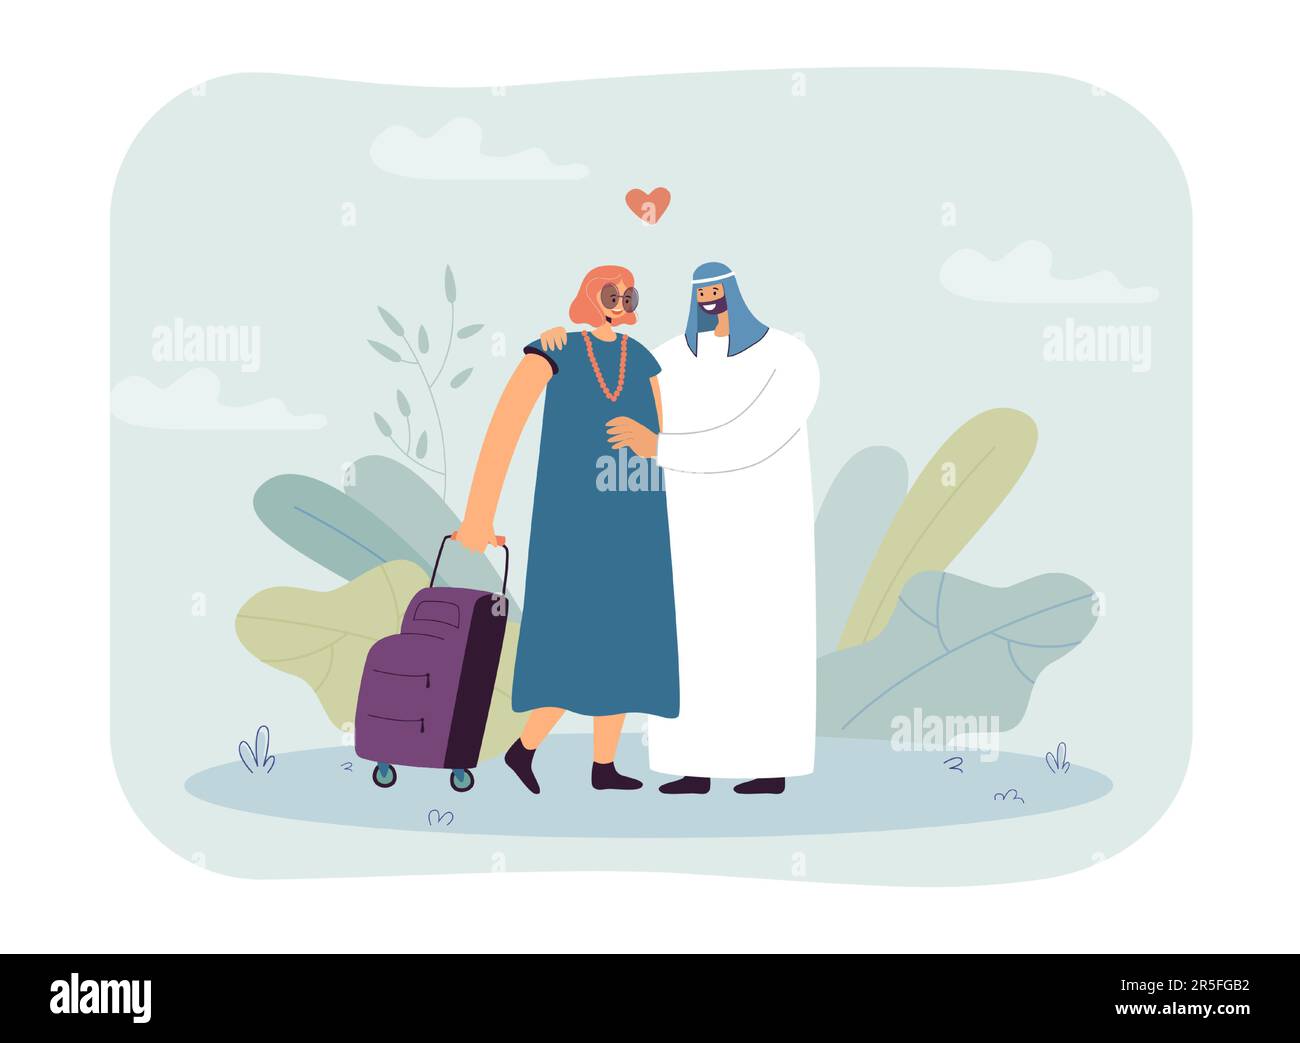 Happy Arab man and woman, couple standing together Stock Vector